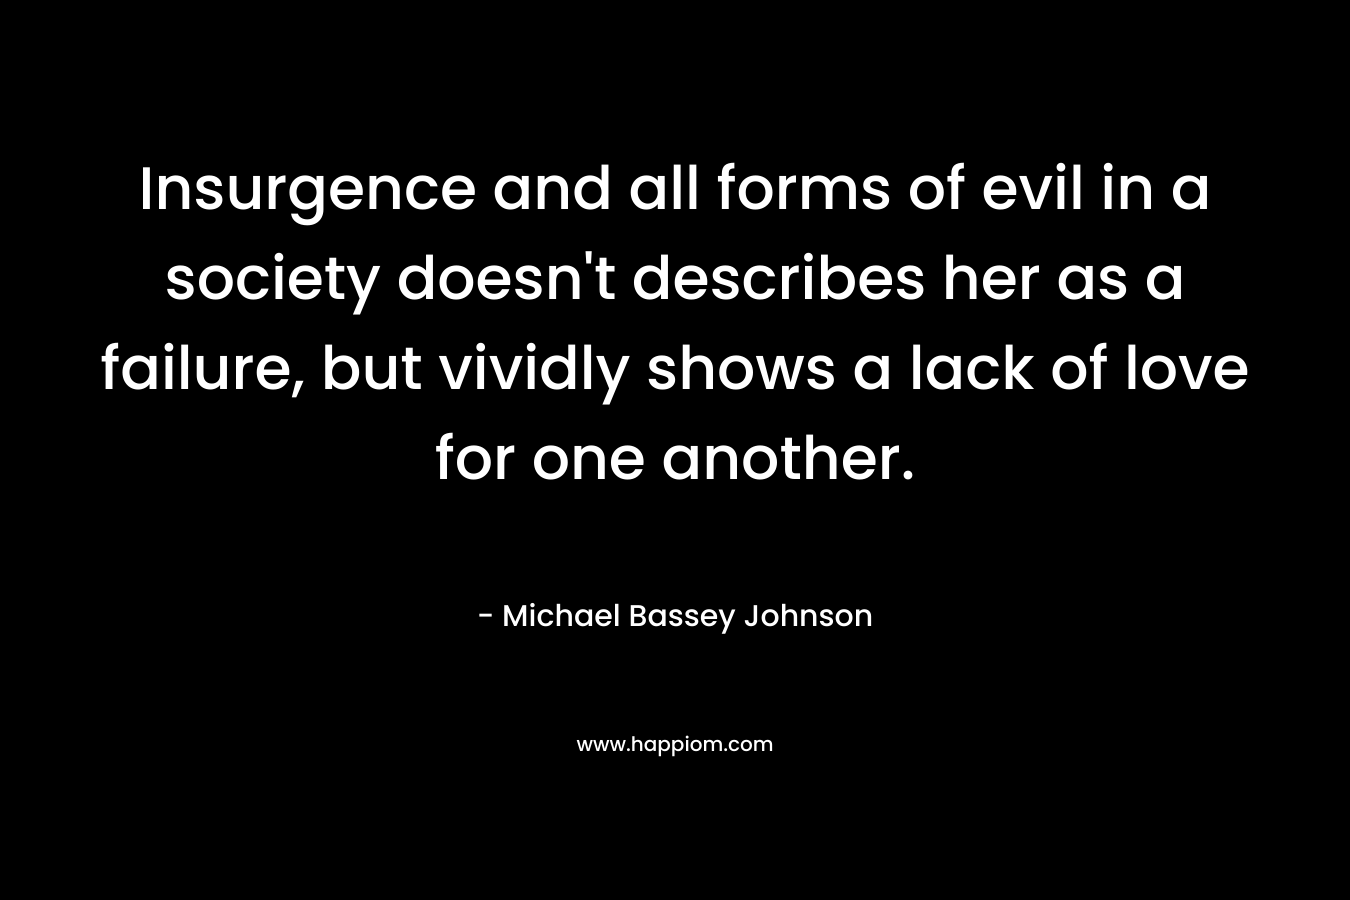 Insurgence and all forms of evil in a society doesn’t describes her as a failure, but vividly shows a lack of love for one another. – Michael Bassey Johnson